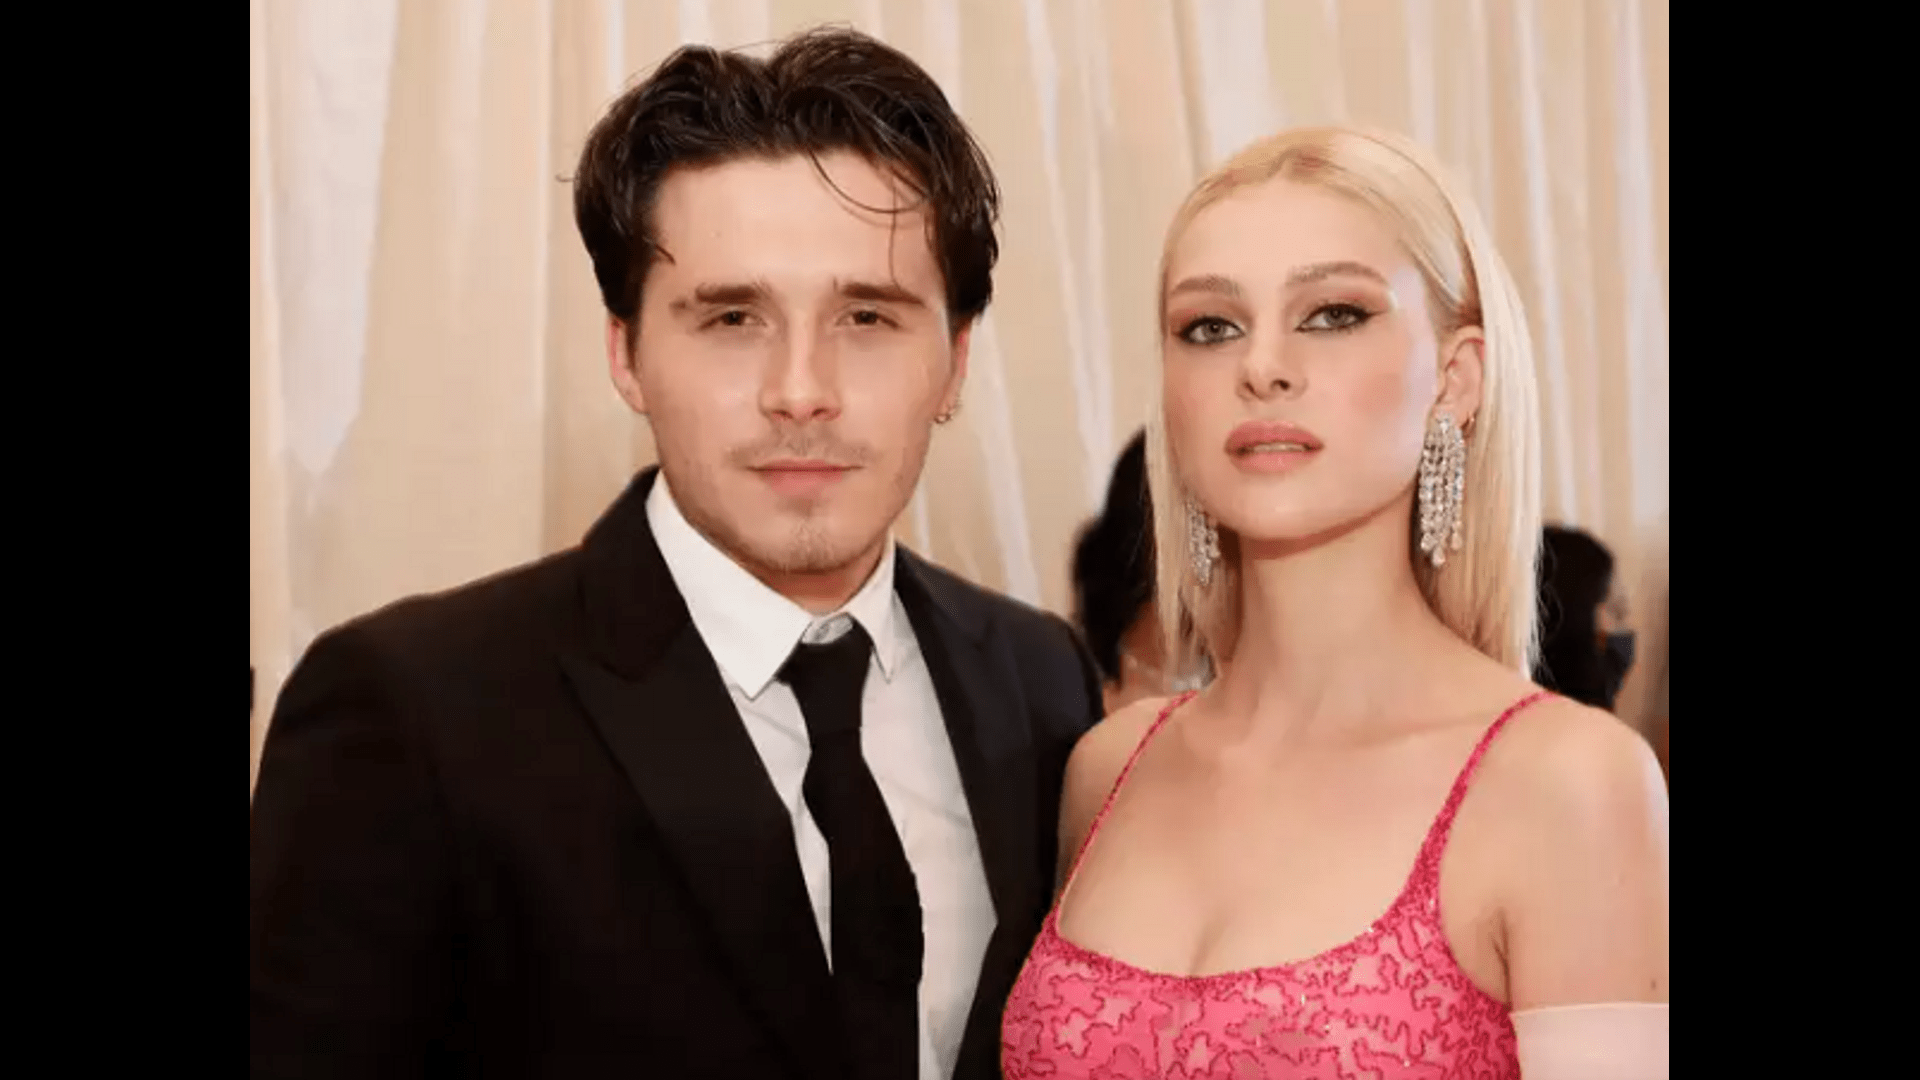 Nicola Peltz and Brooklyn Beckham share the only photo from their wedding